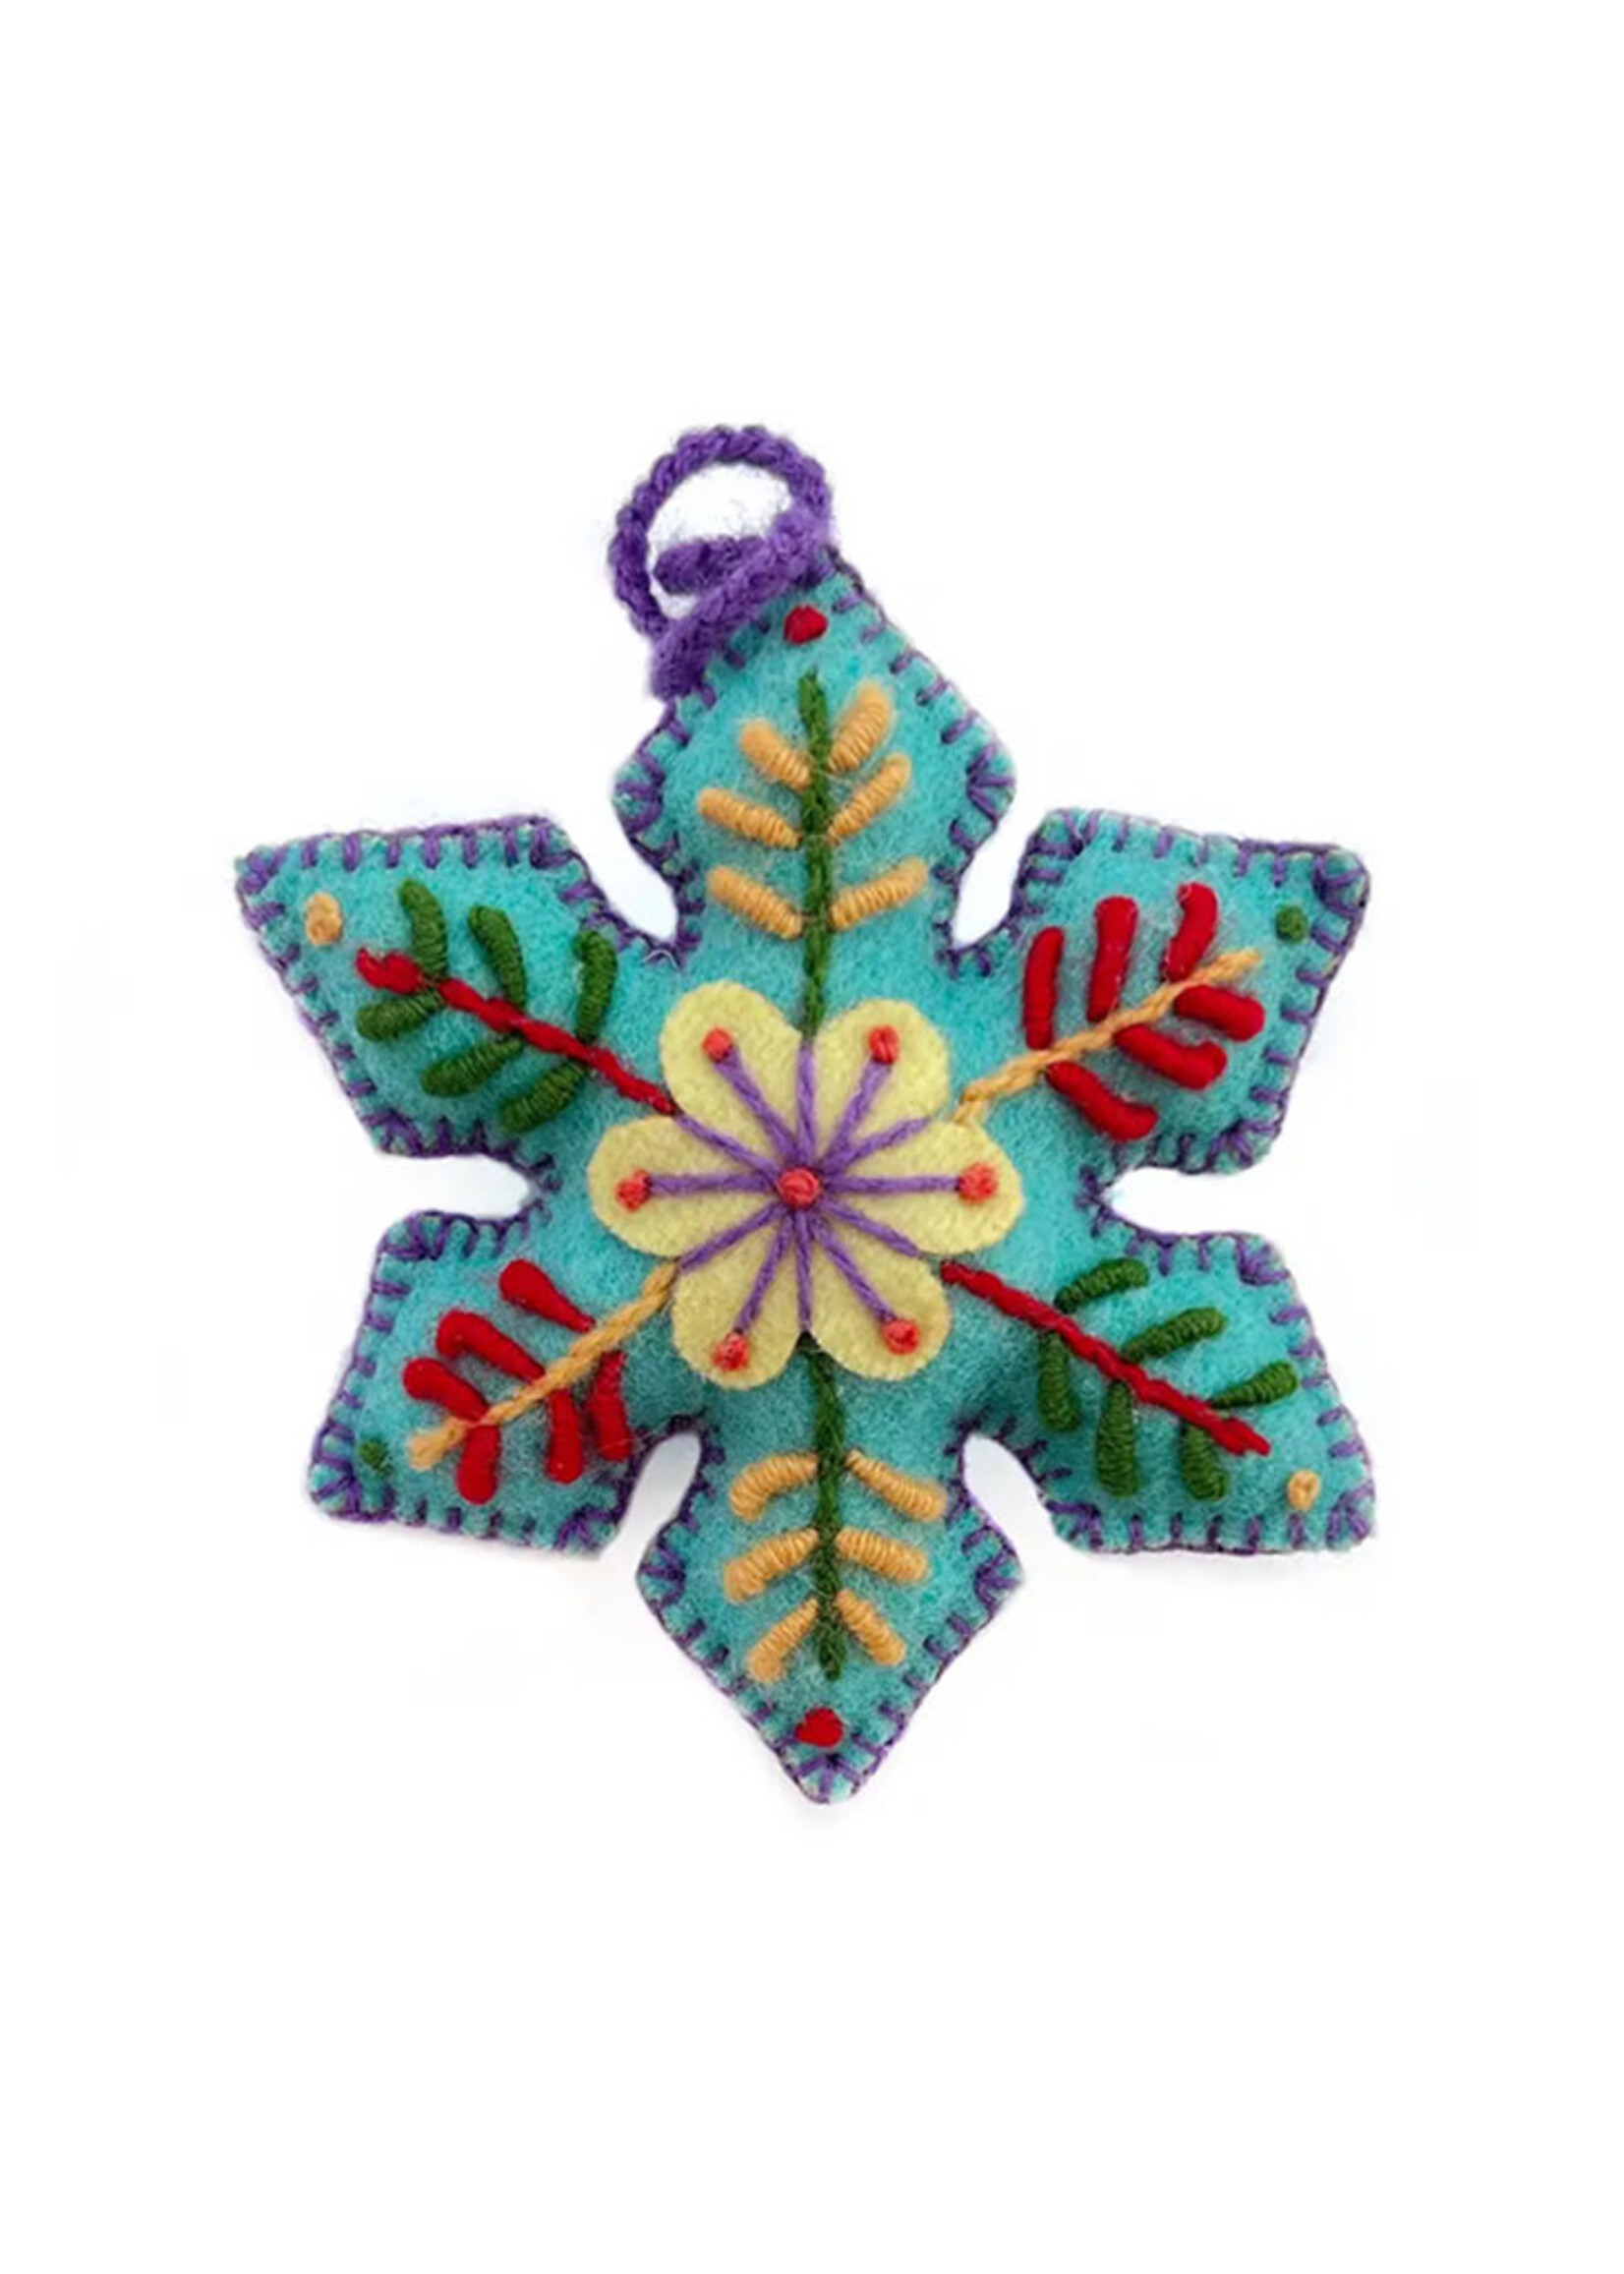 Ornaments 4 Orphans Embroidered Snowflake Ornament - Blue